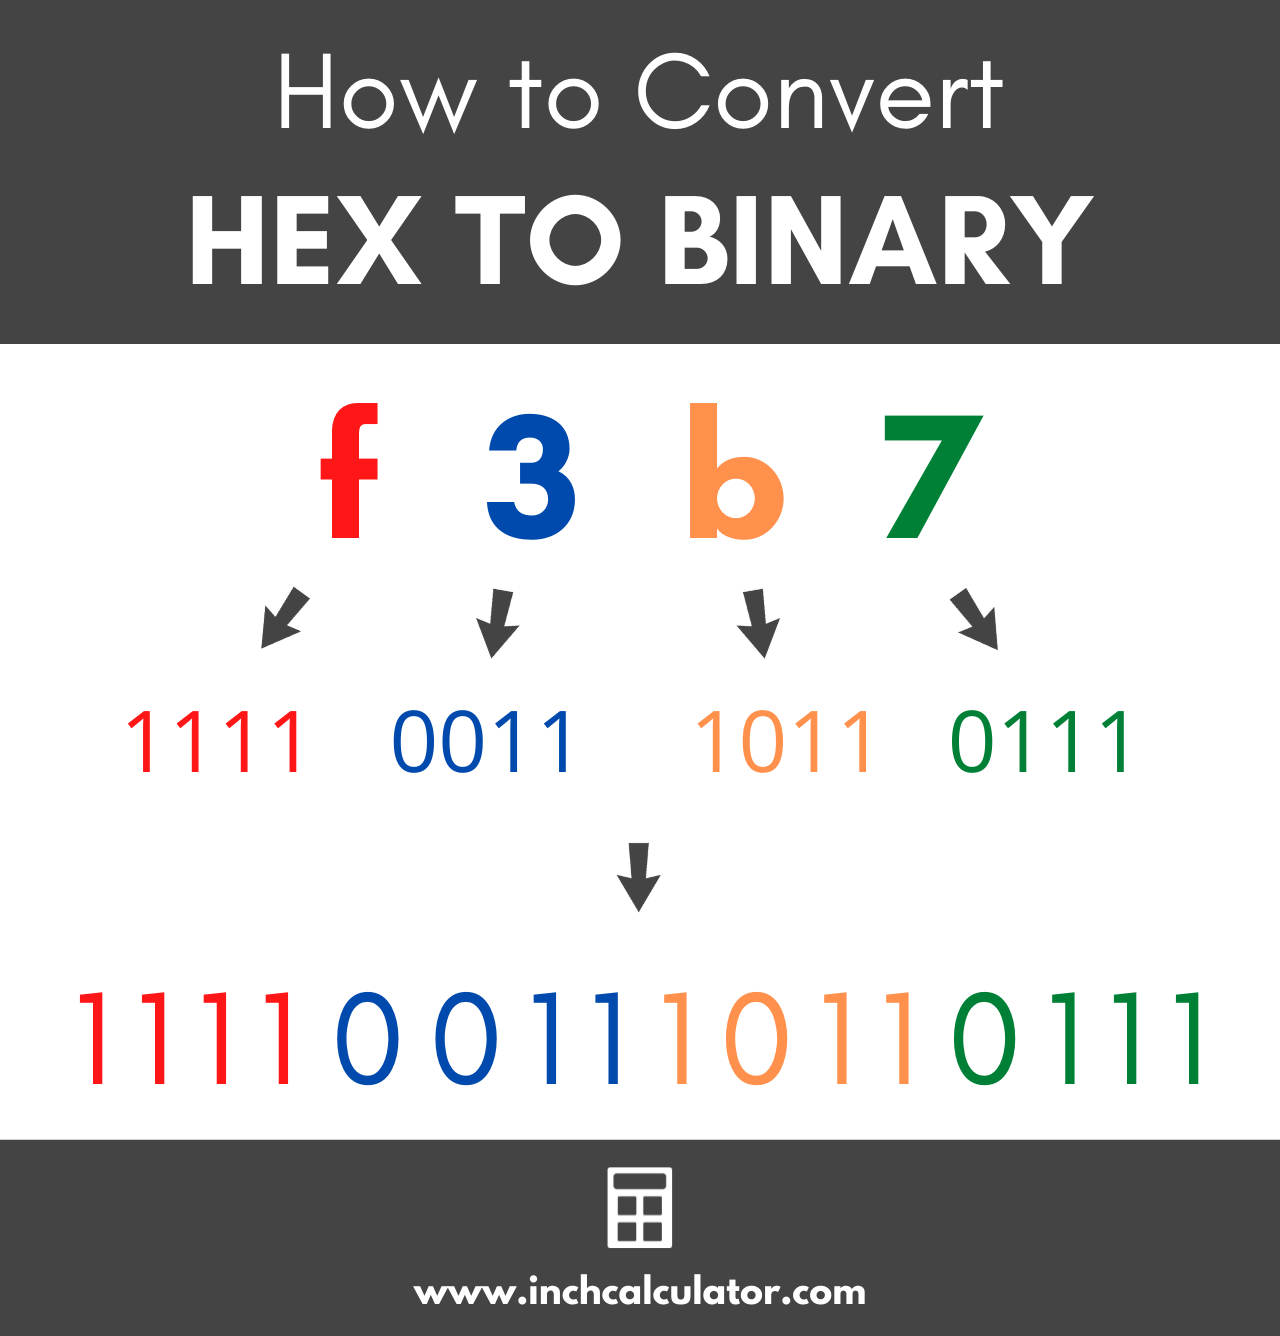 graphic showing how to convert a hex number to binary